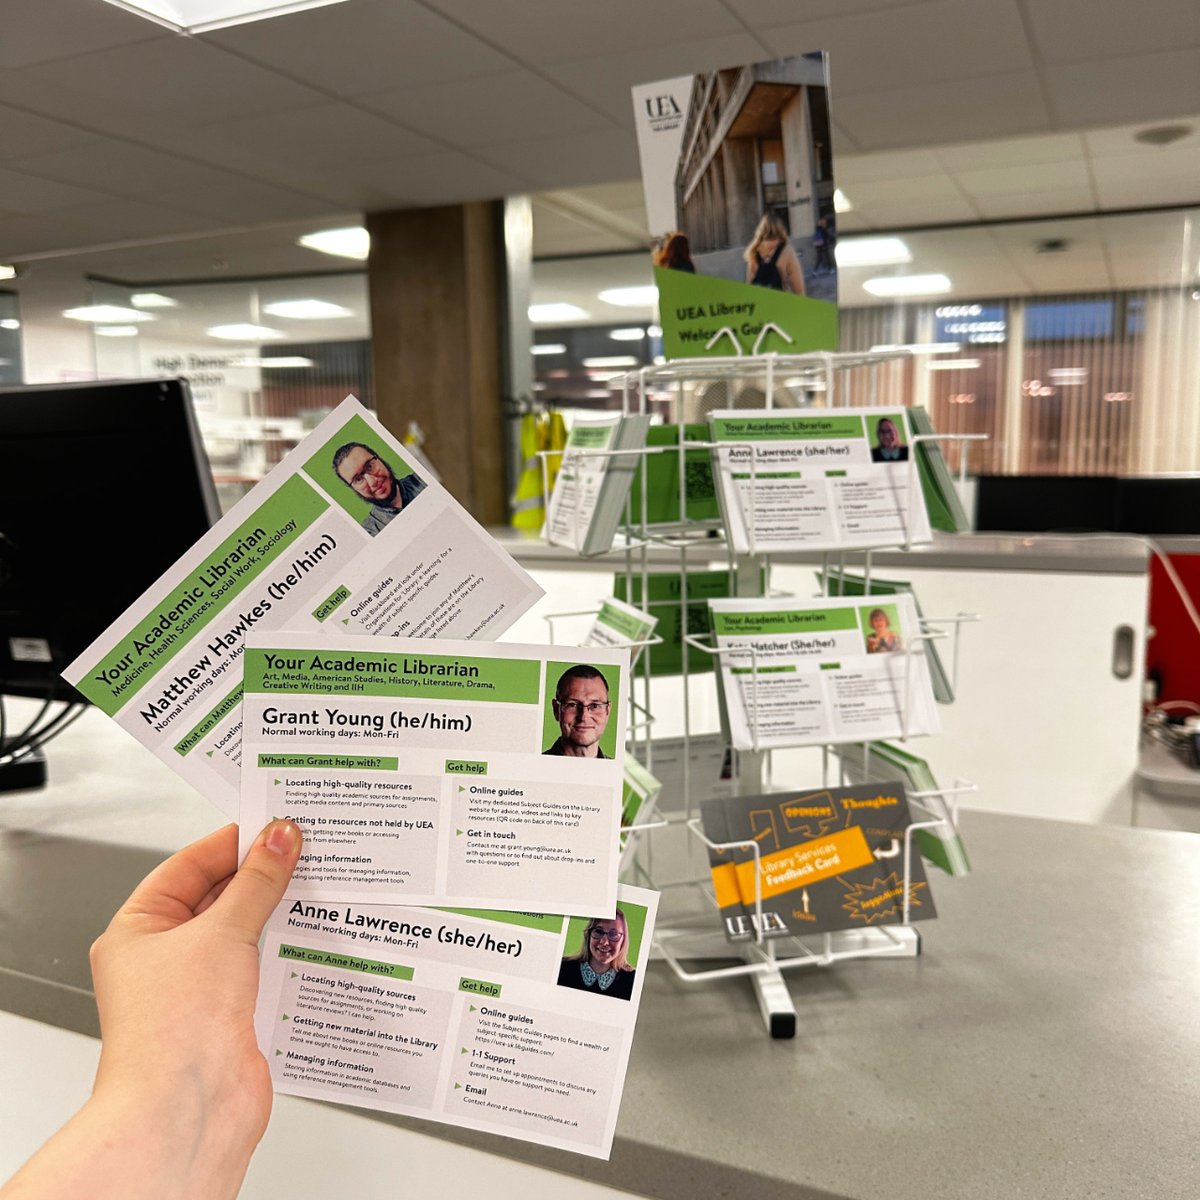 Have you picked up an Academic Librarian card from our Helpdesk yet?  Our Academic Librarians are here to help with a range of things such as locating high quality resources and managing information.  Find out more by grabbing a card from the Helpdesk on Floor 0.